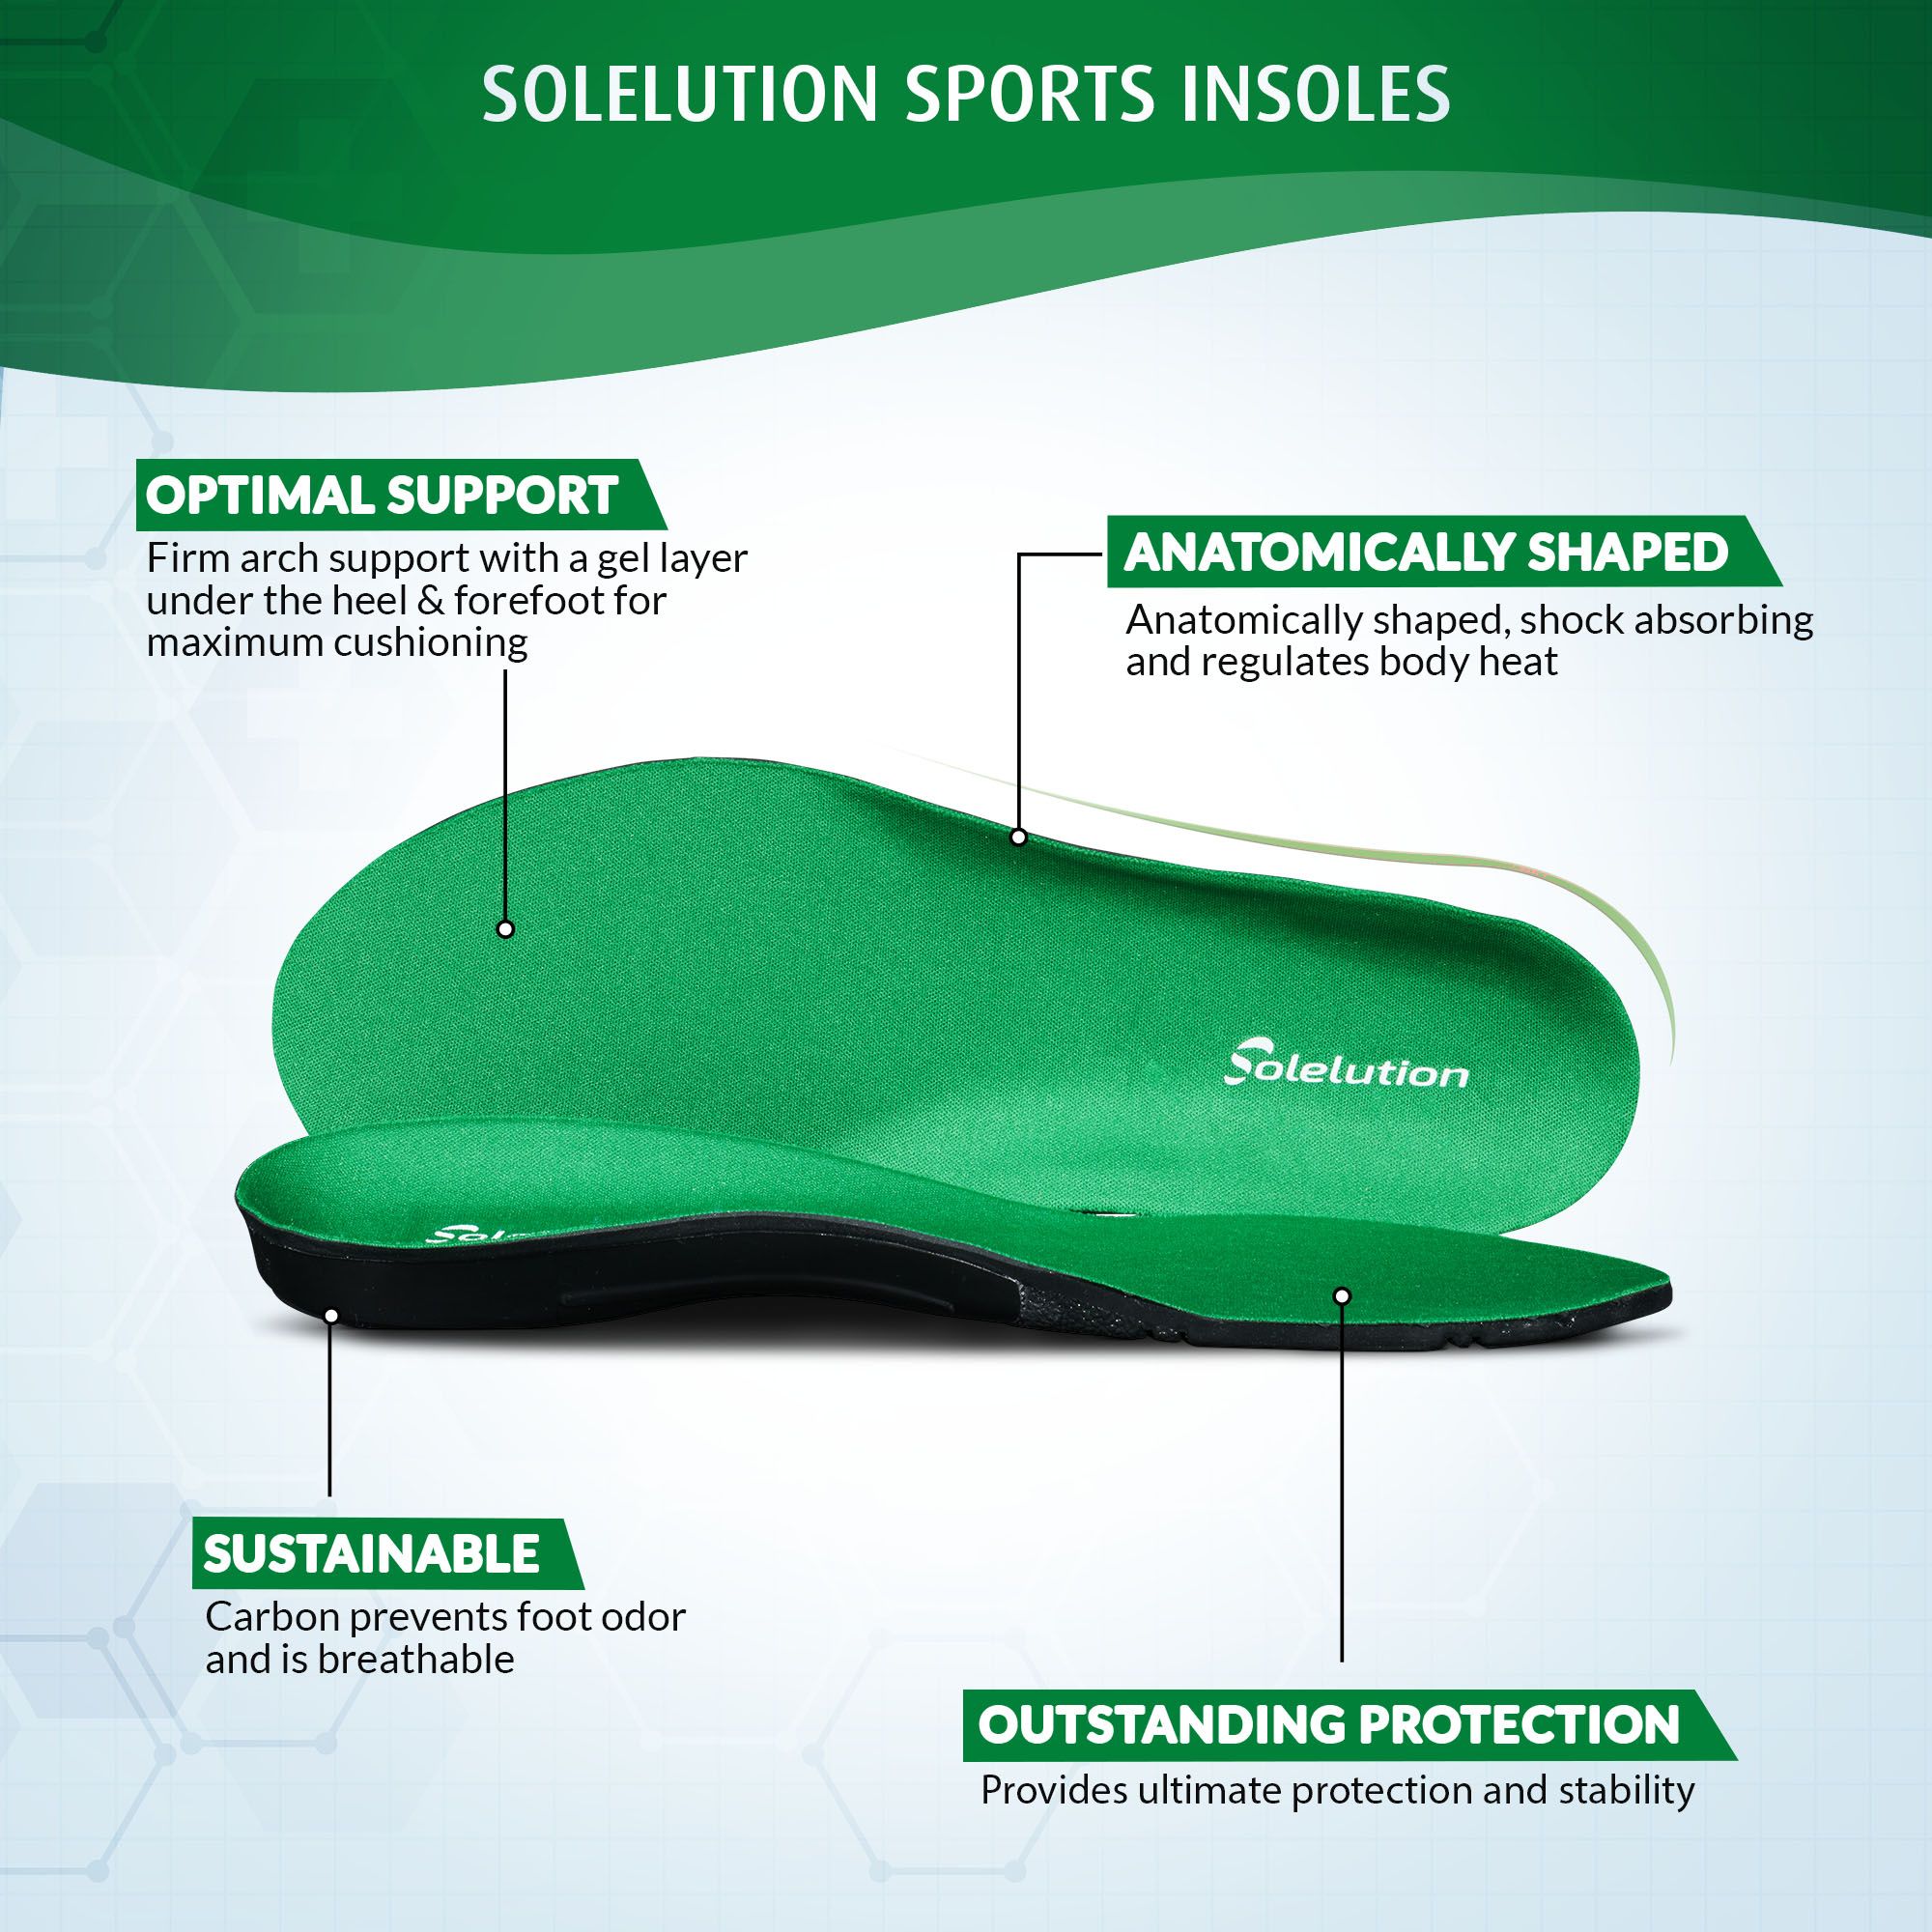 Solelution sports insoles USP